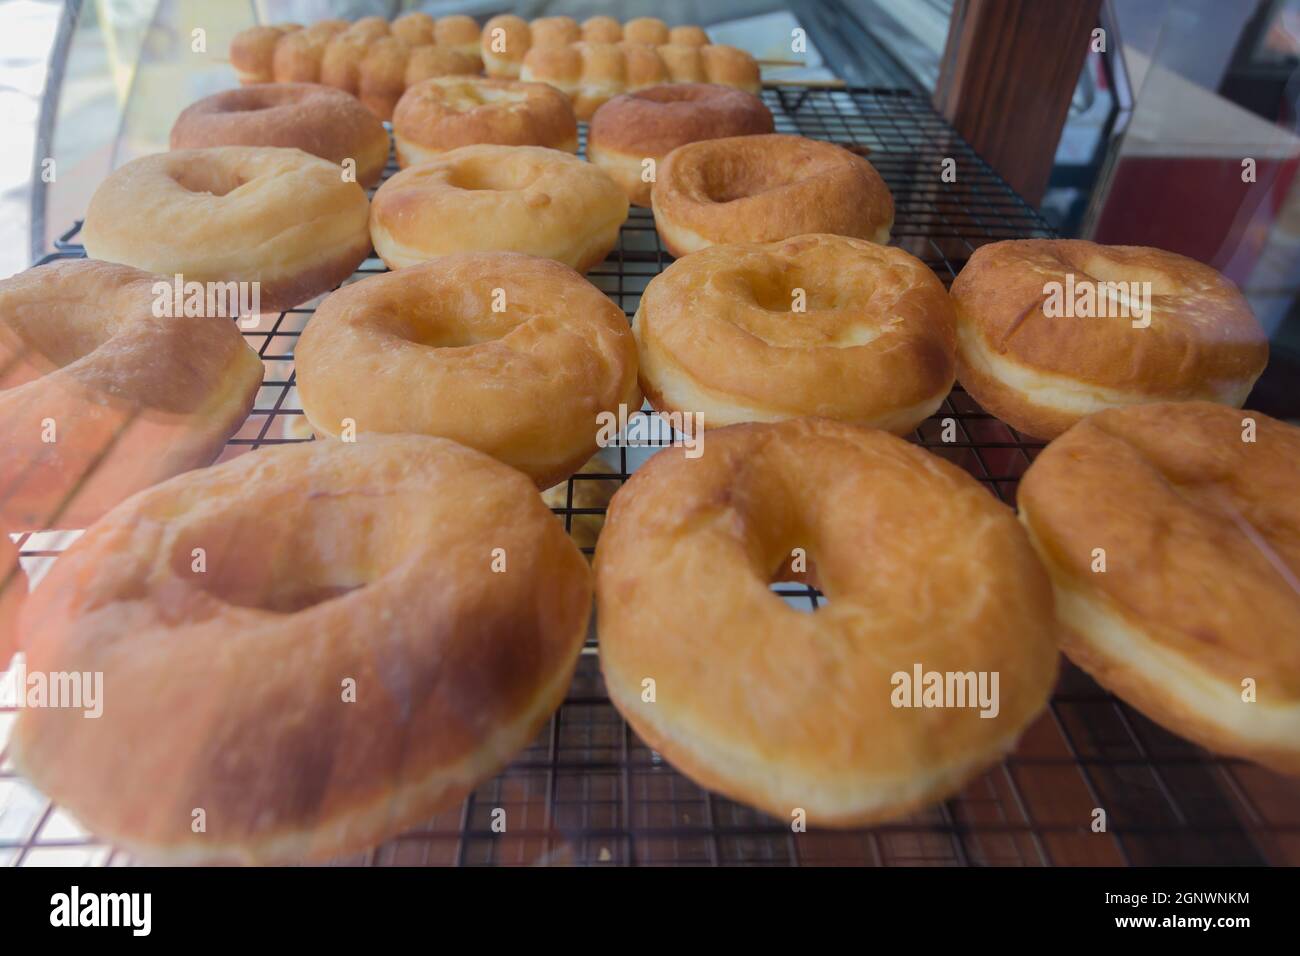 fresh uncoated donuts in display tray Stock Photo